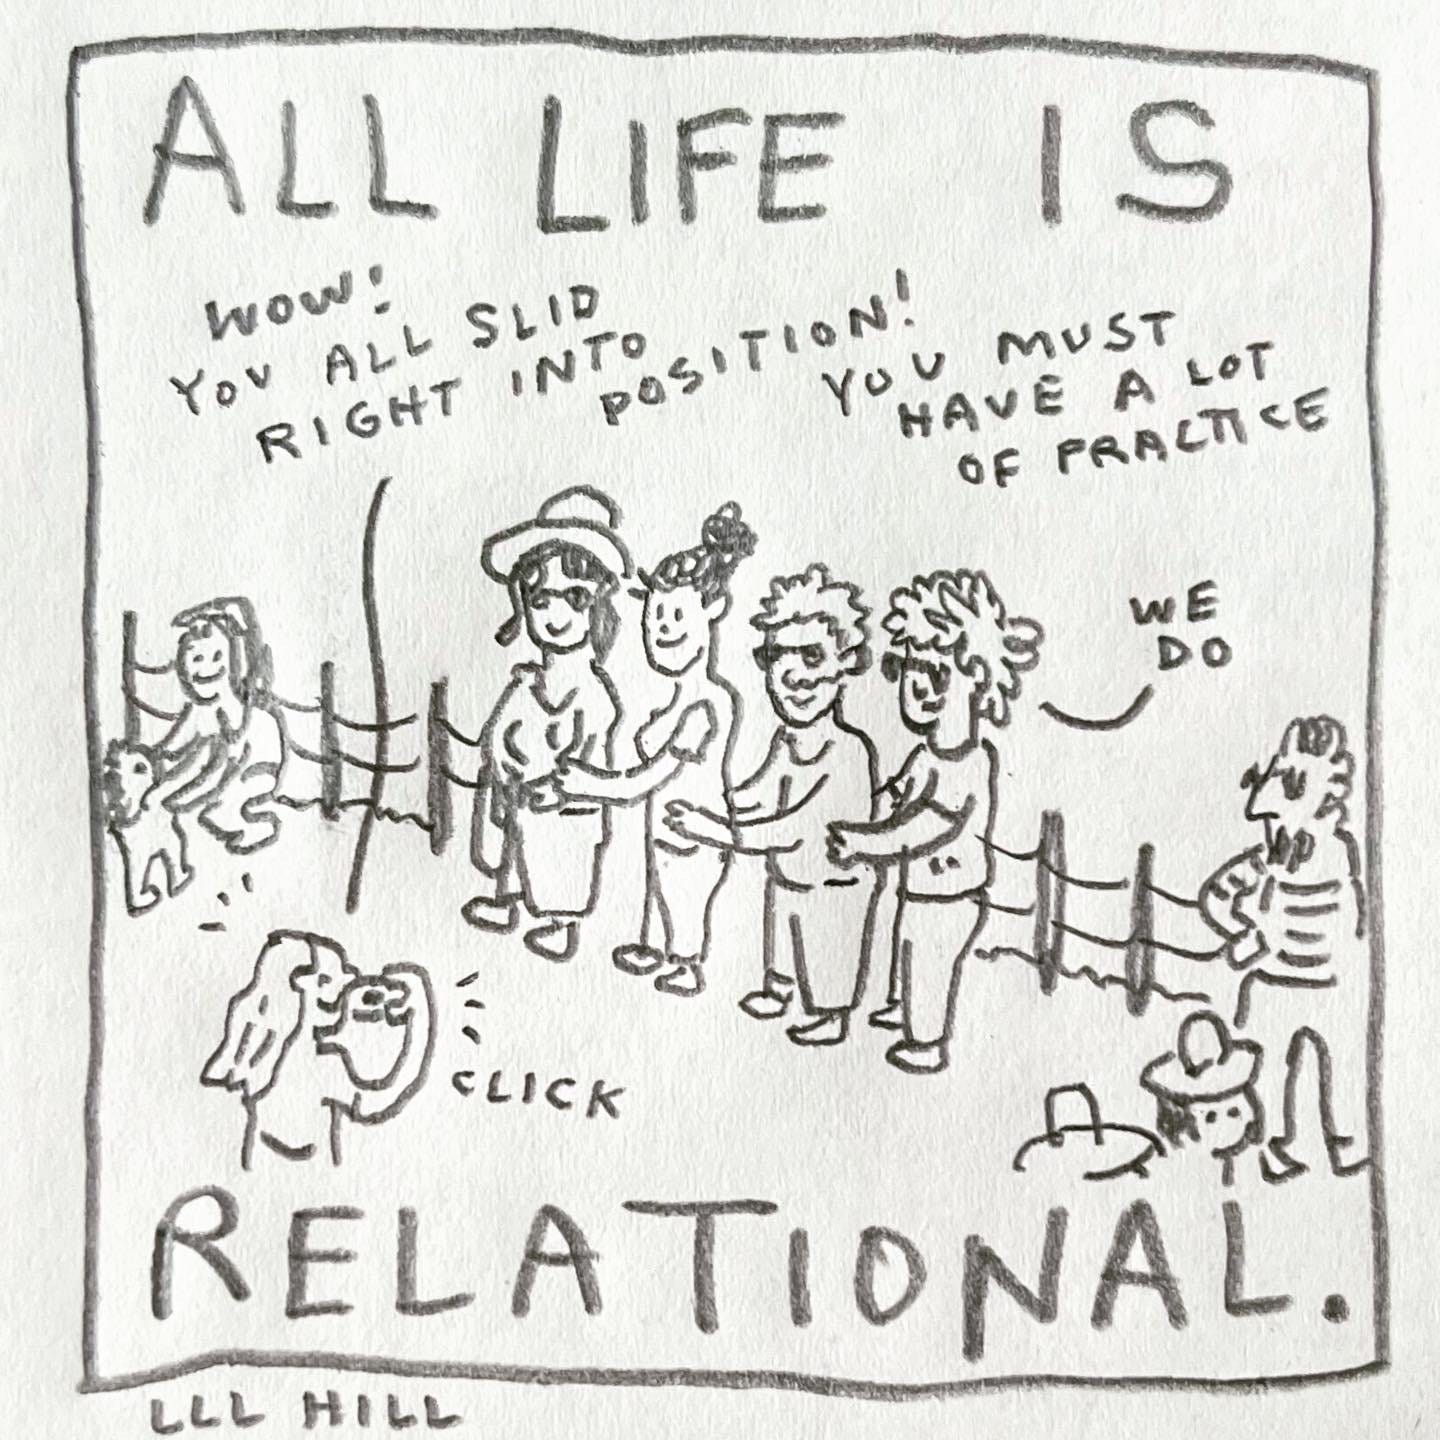 Panel 6: all life is relational. Lark, the couple, and a woman with hat and sunglasses holding a bag all smile for the camera, in a line with hands on the hips of the person in front of them, like a prom photo. The woman takes a picture and says, “Wow! You all slid right into position! You must have a lot of practice" Lark says "we do"